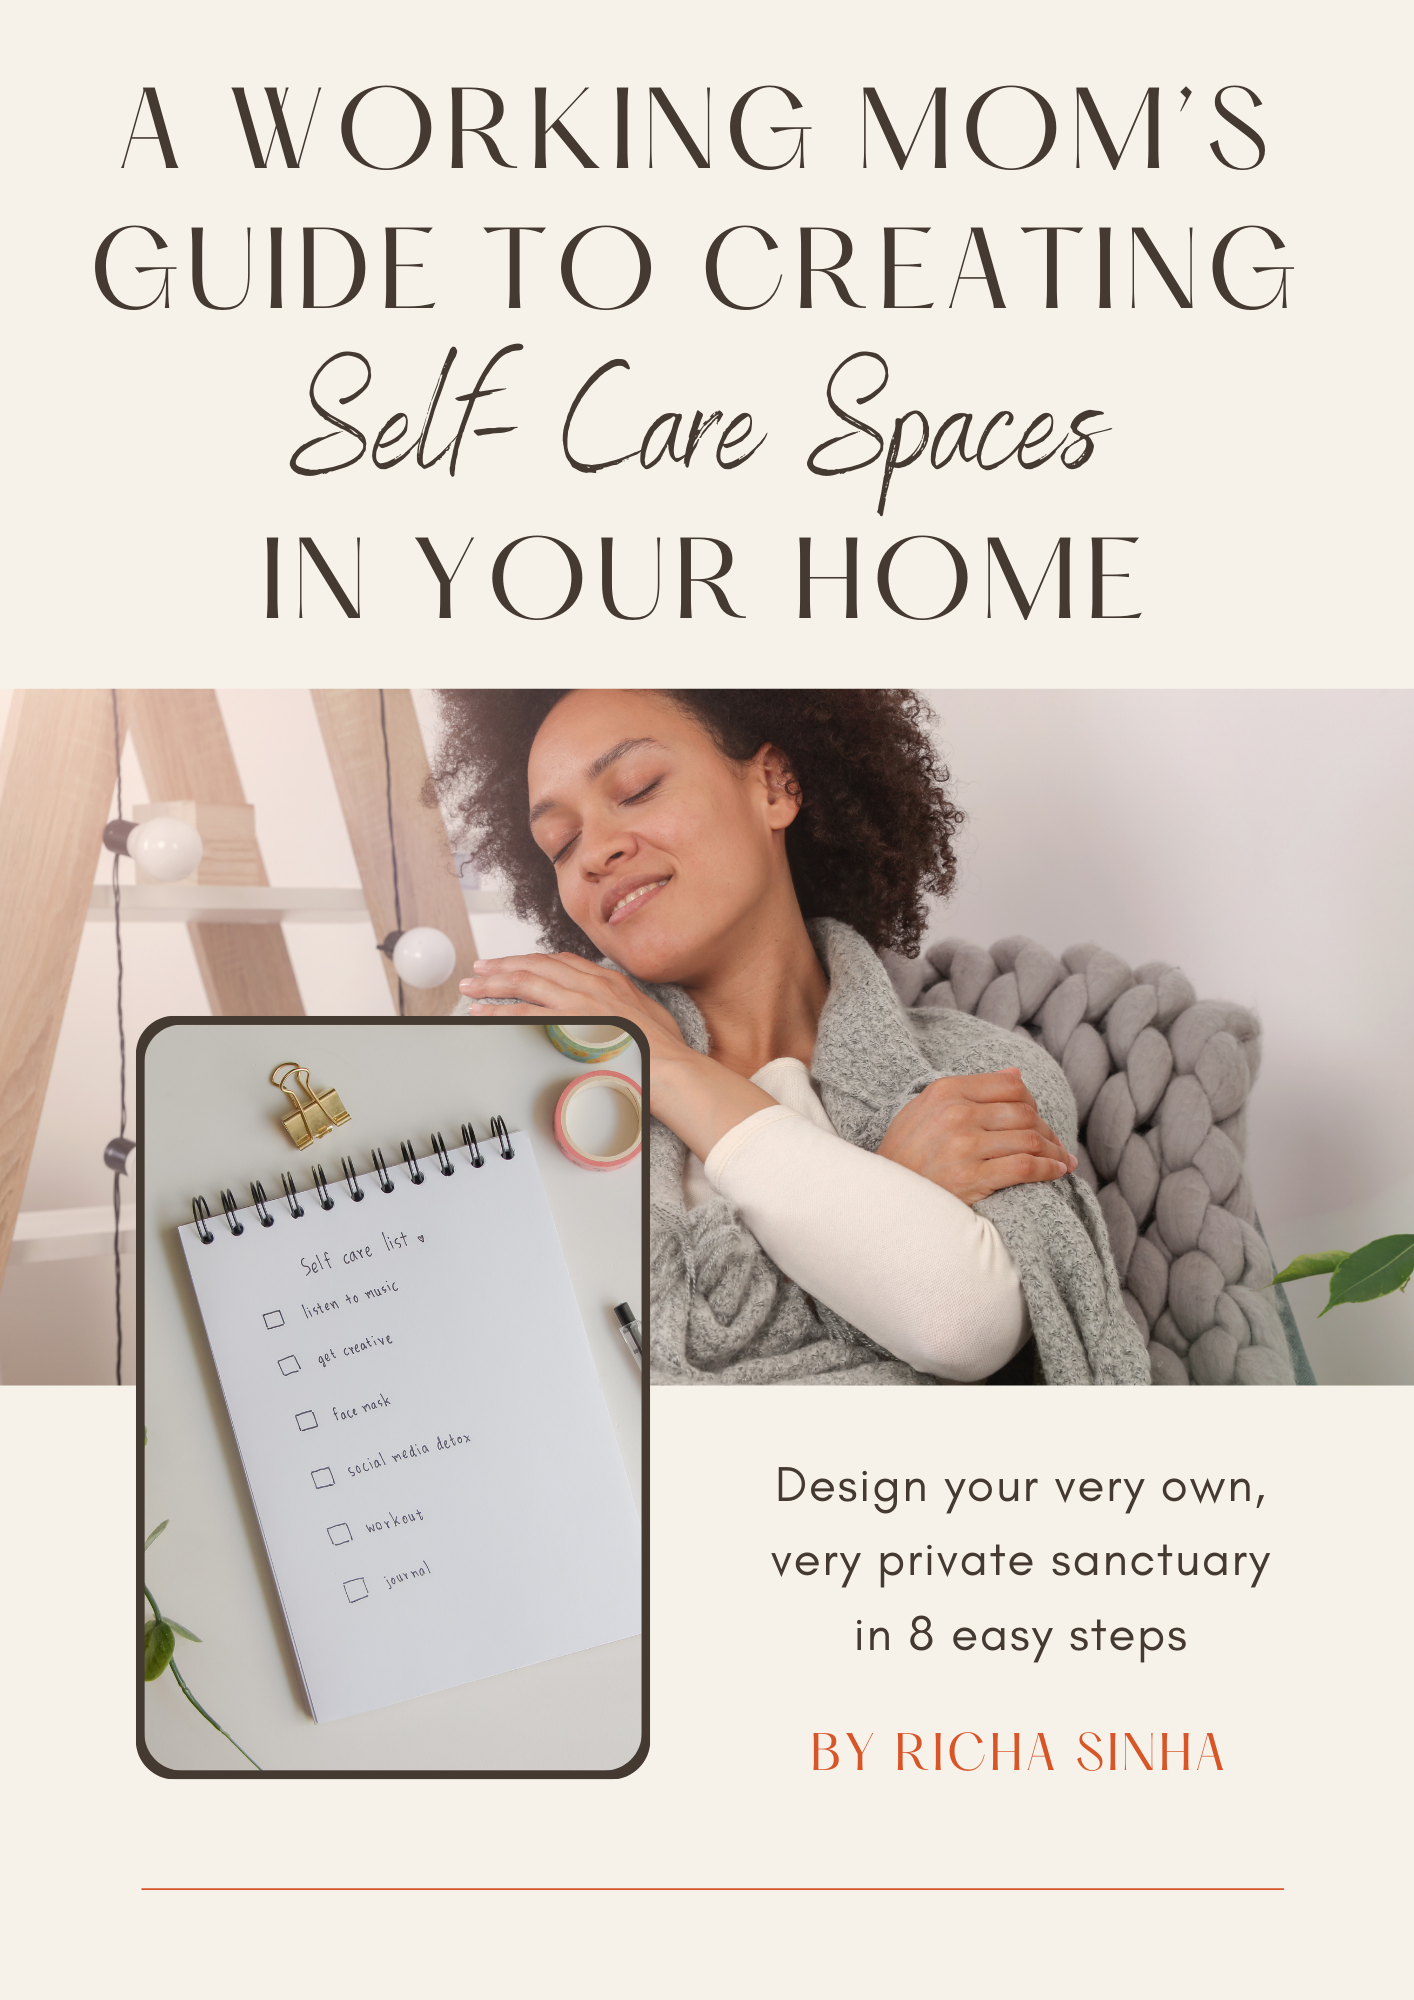 Self-Care-Guide-for-Working-Moms Image